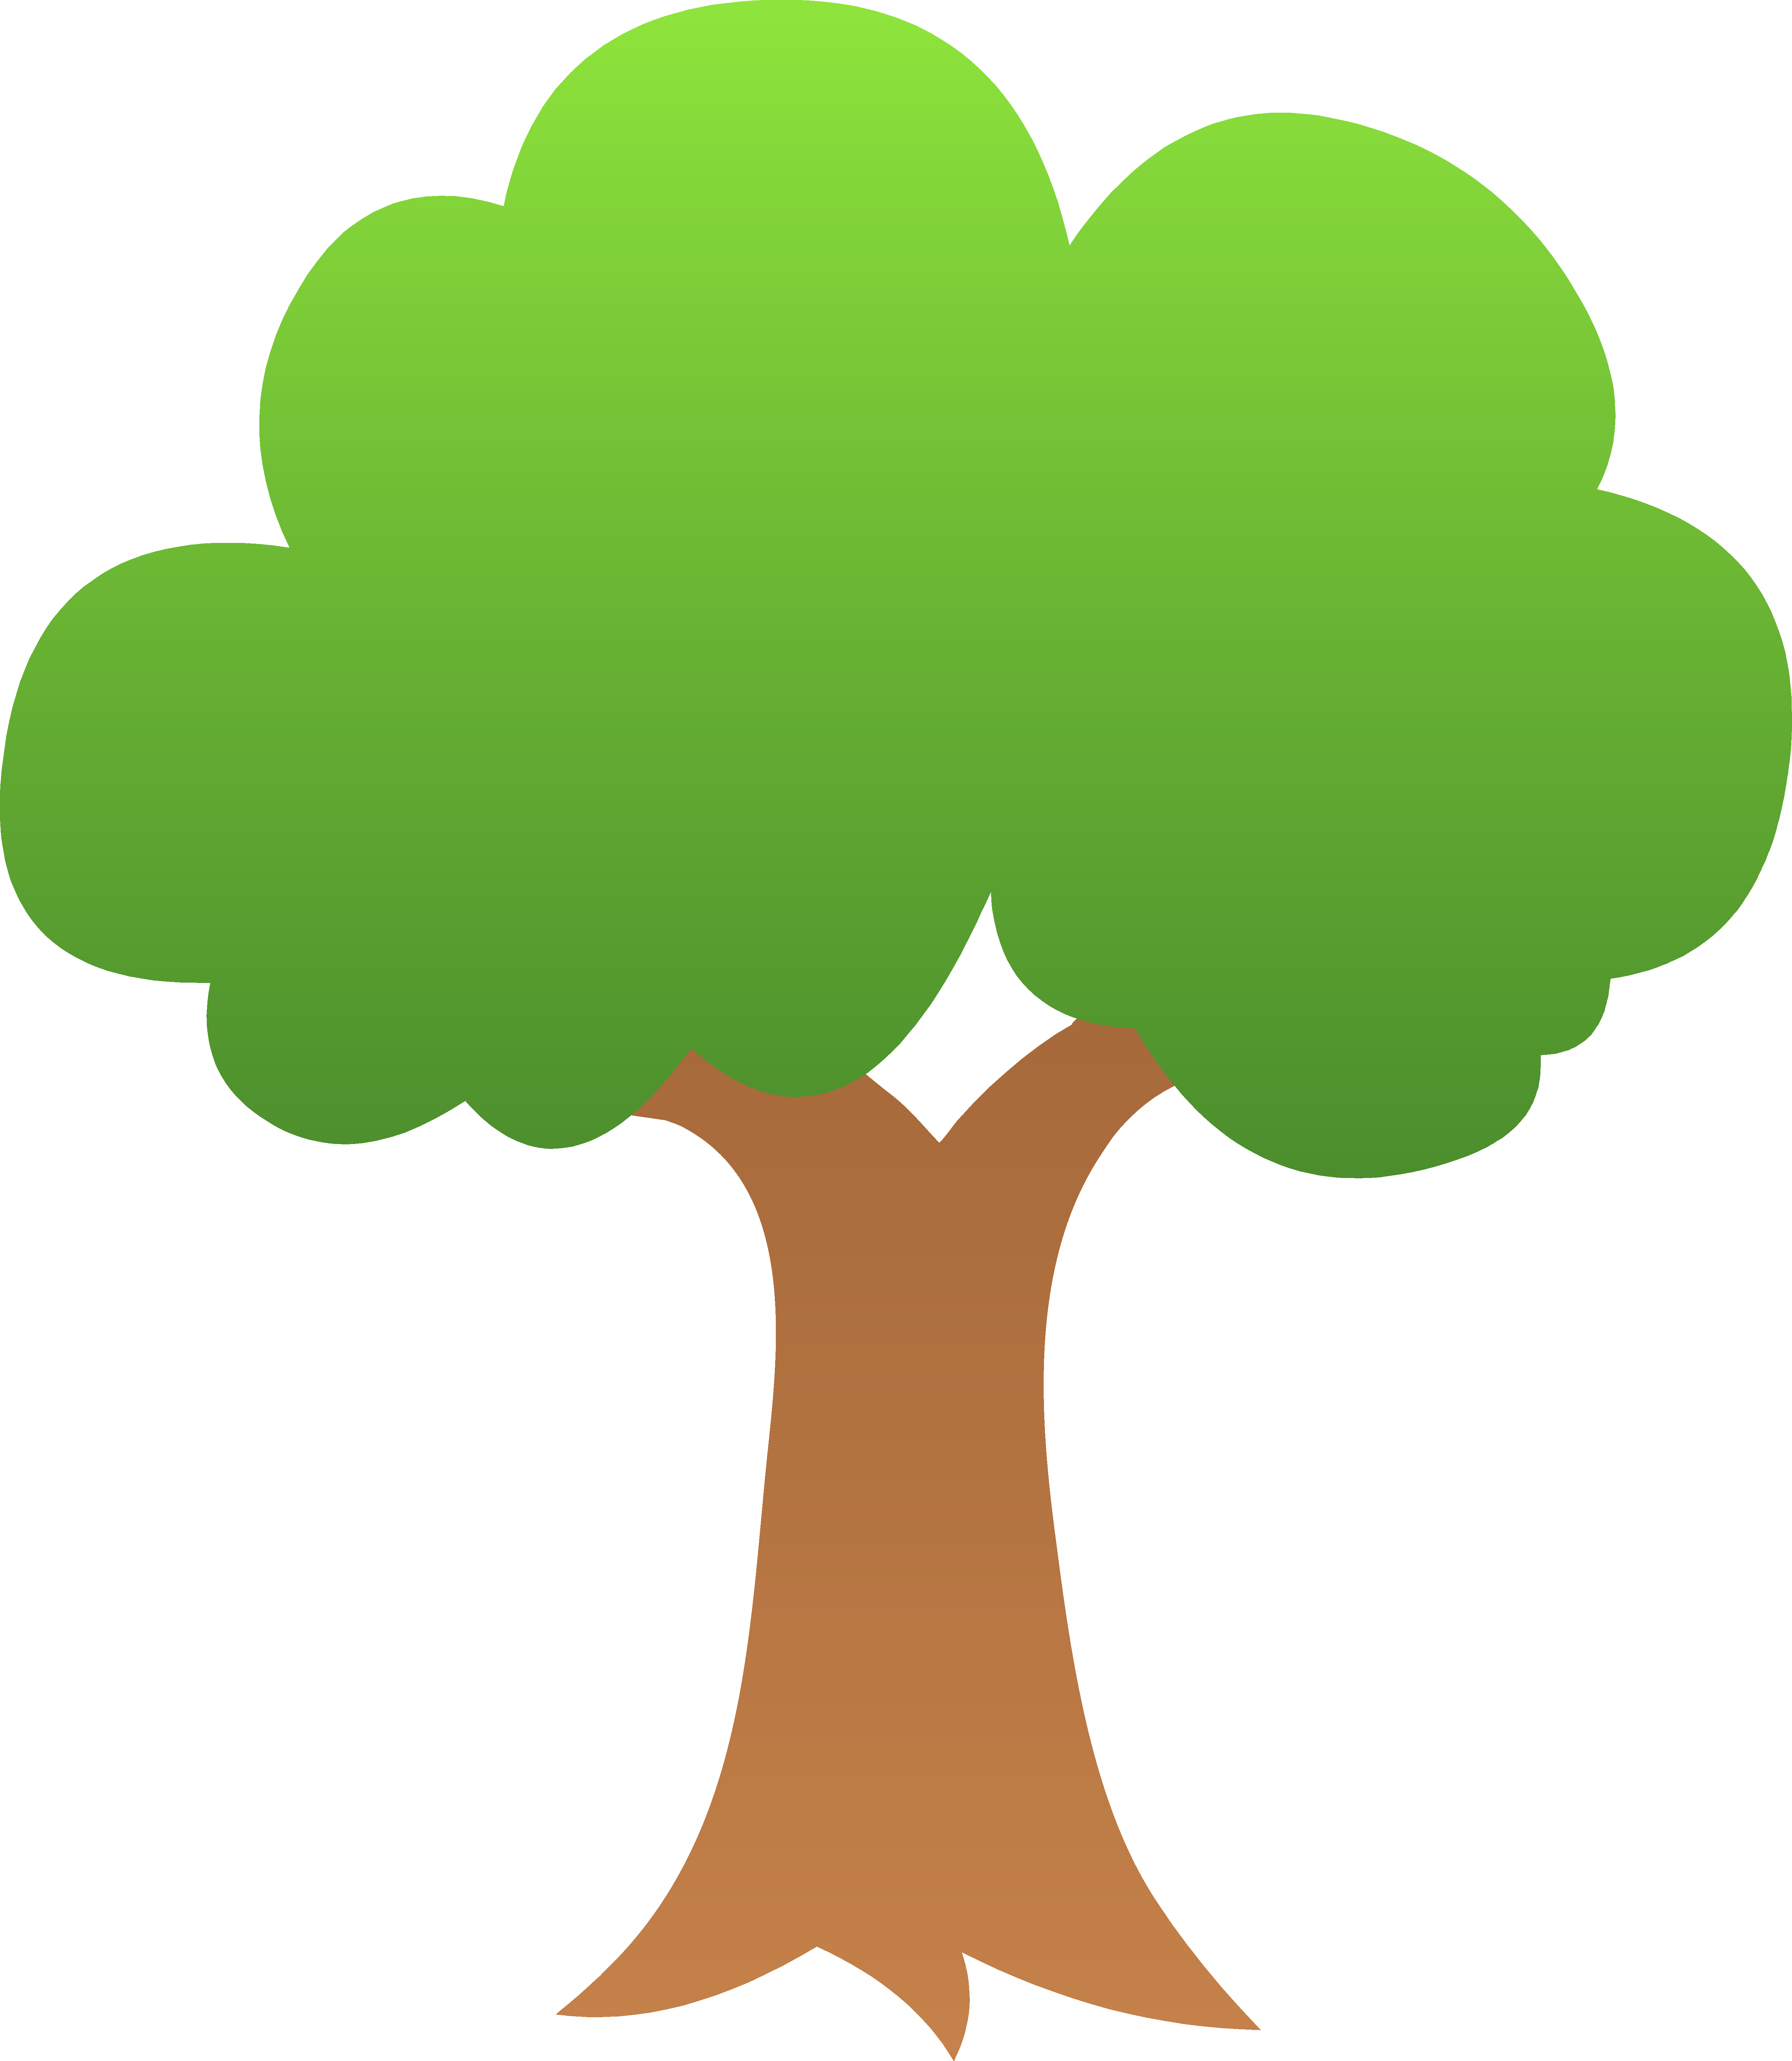 Top 83 Tree Clip Art Free Clipart Image_freeclipartimage